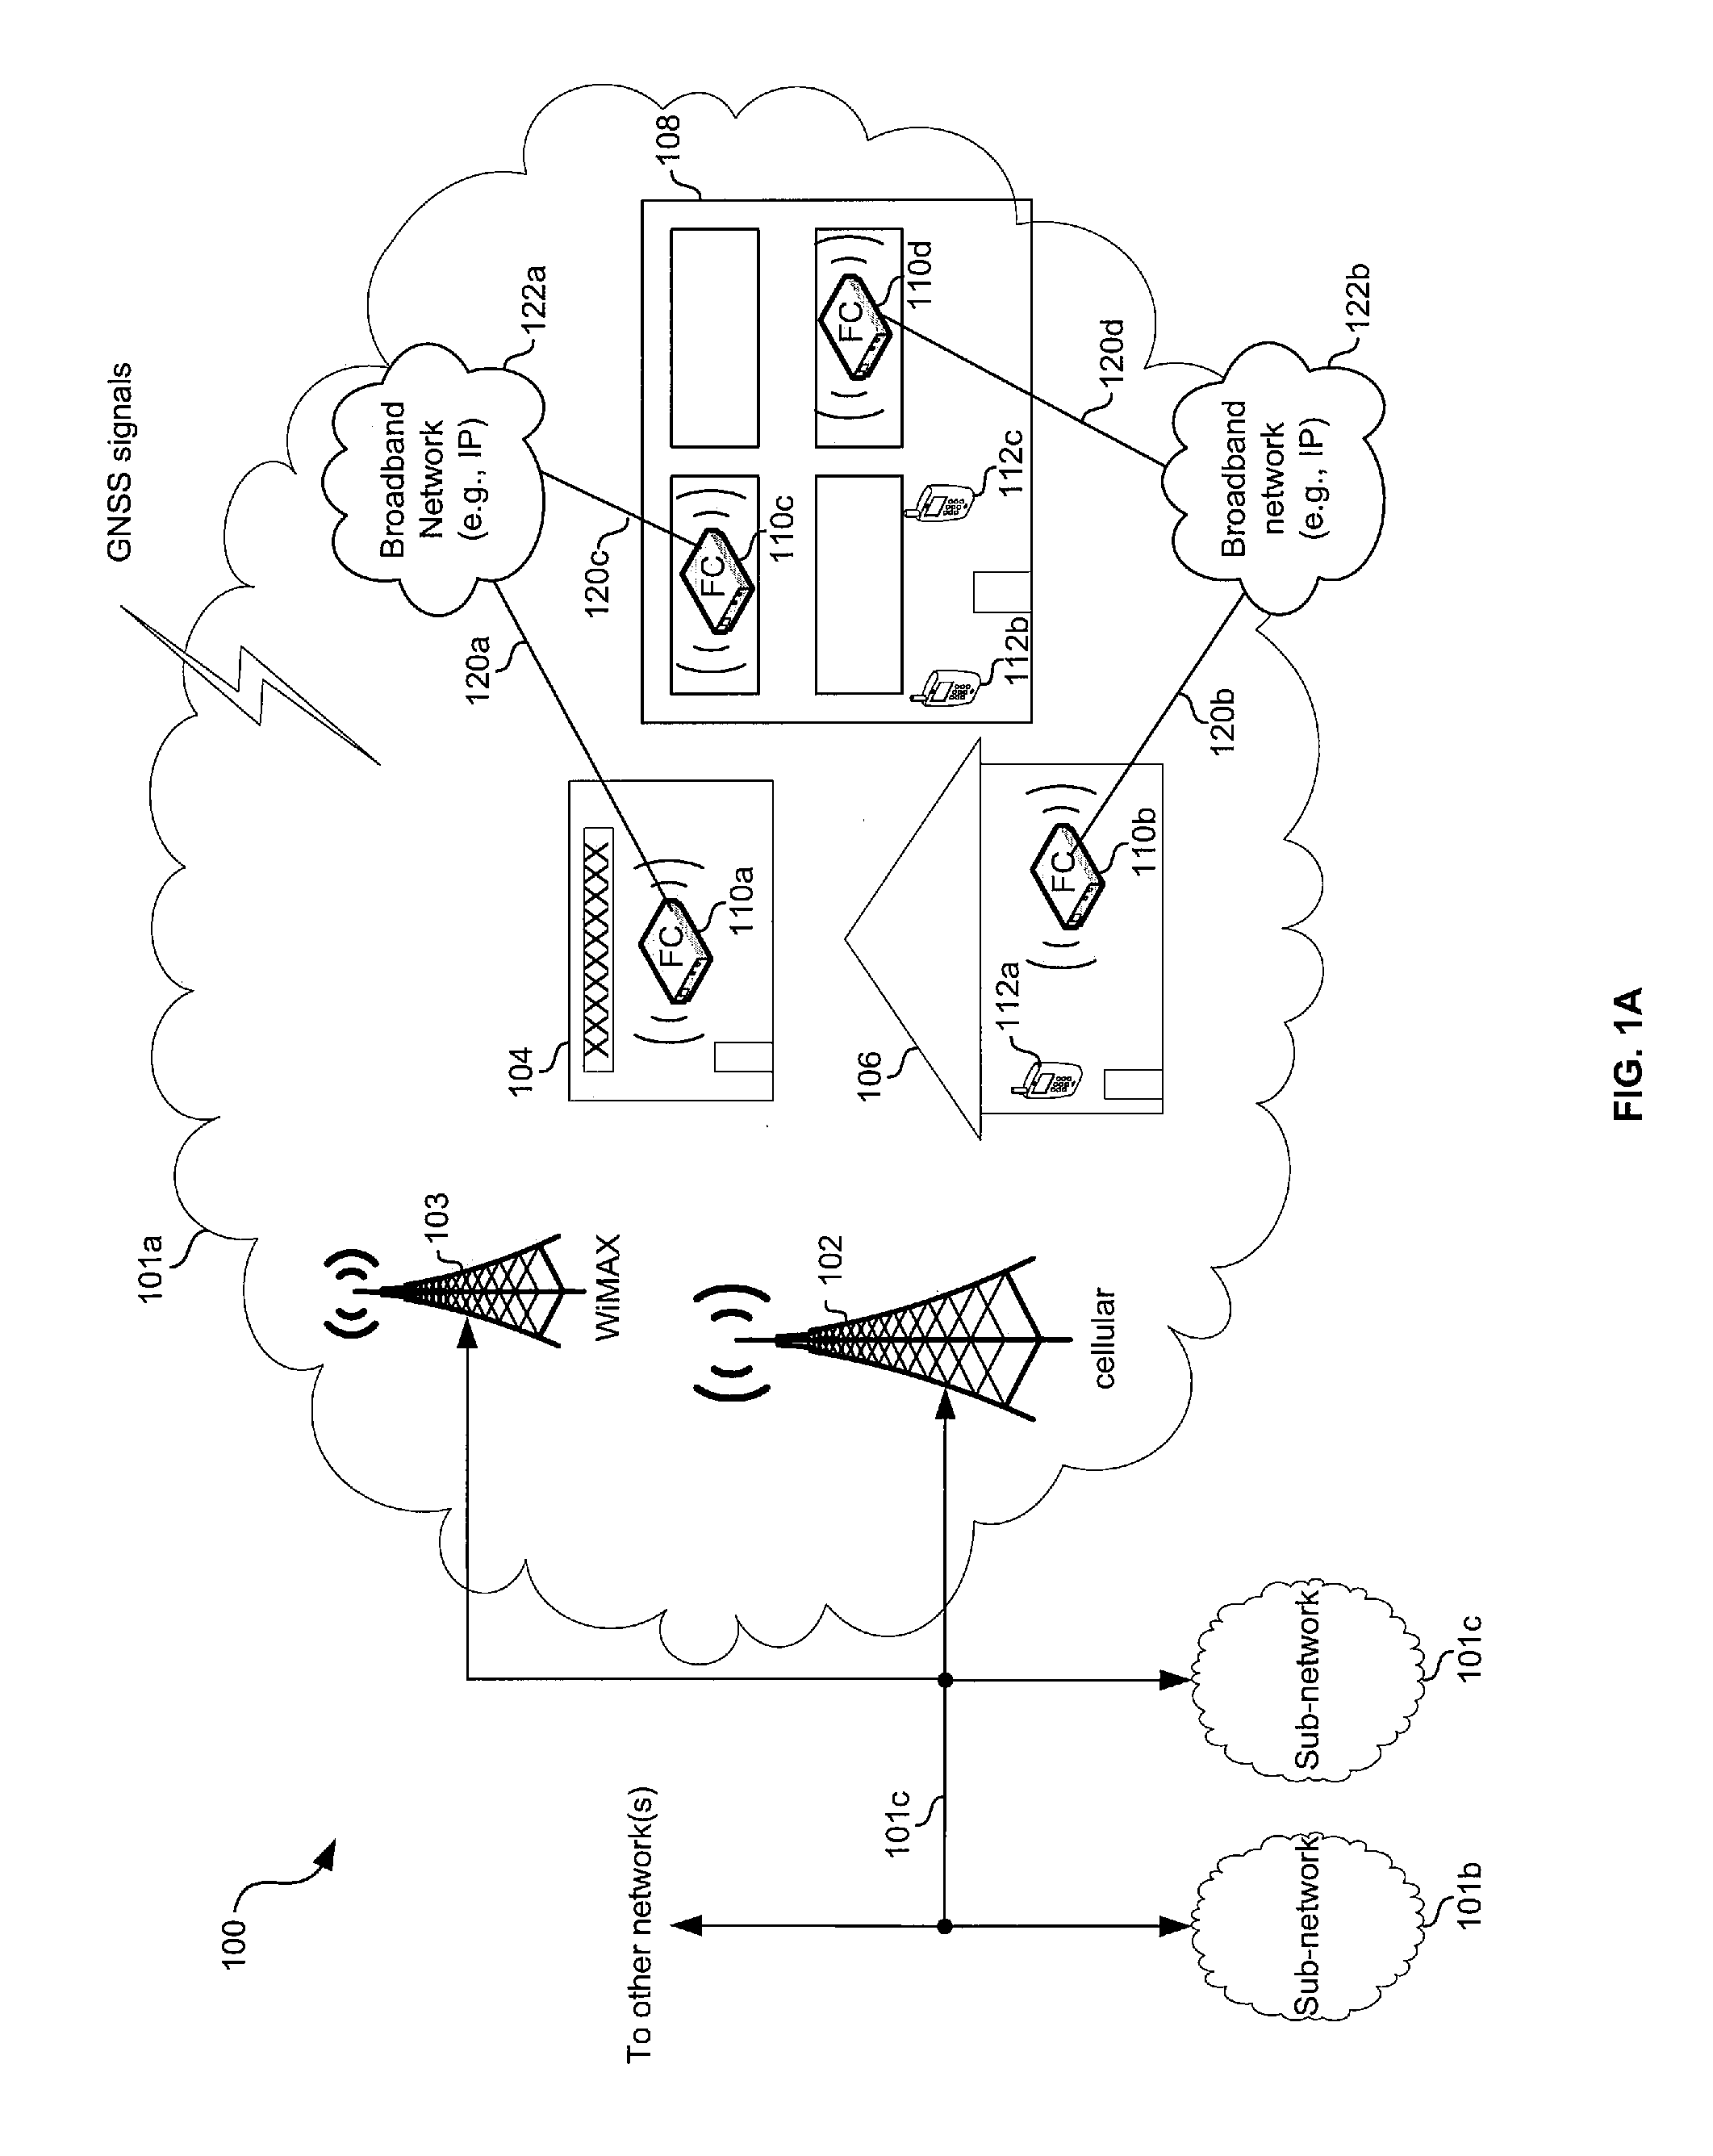 Multicasting or broadcasting via a plurality of femtocells